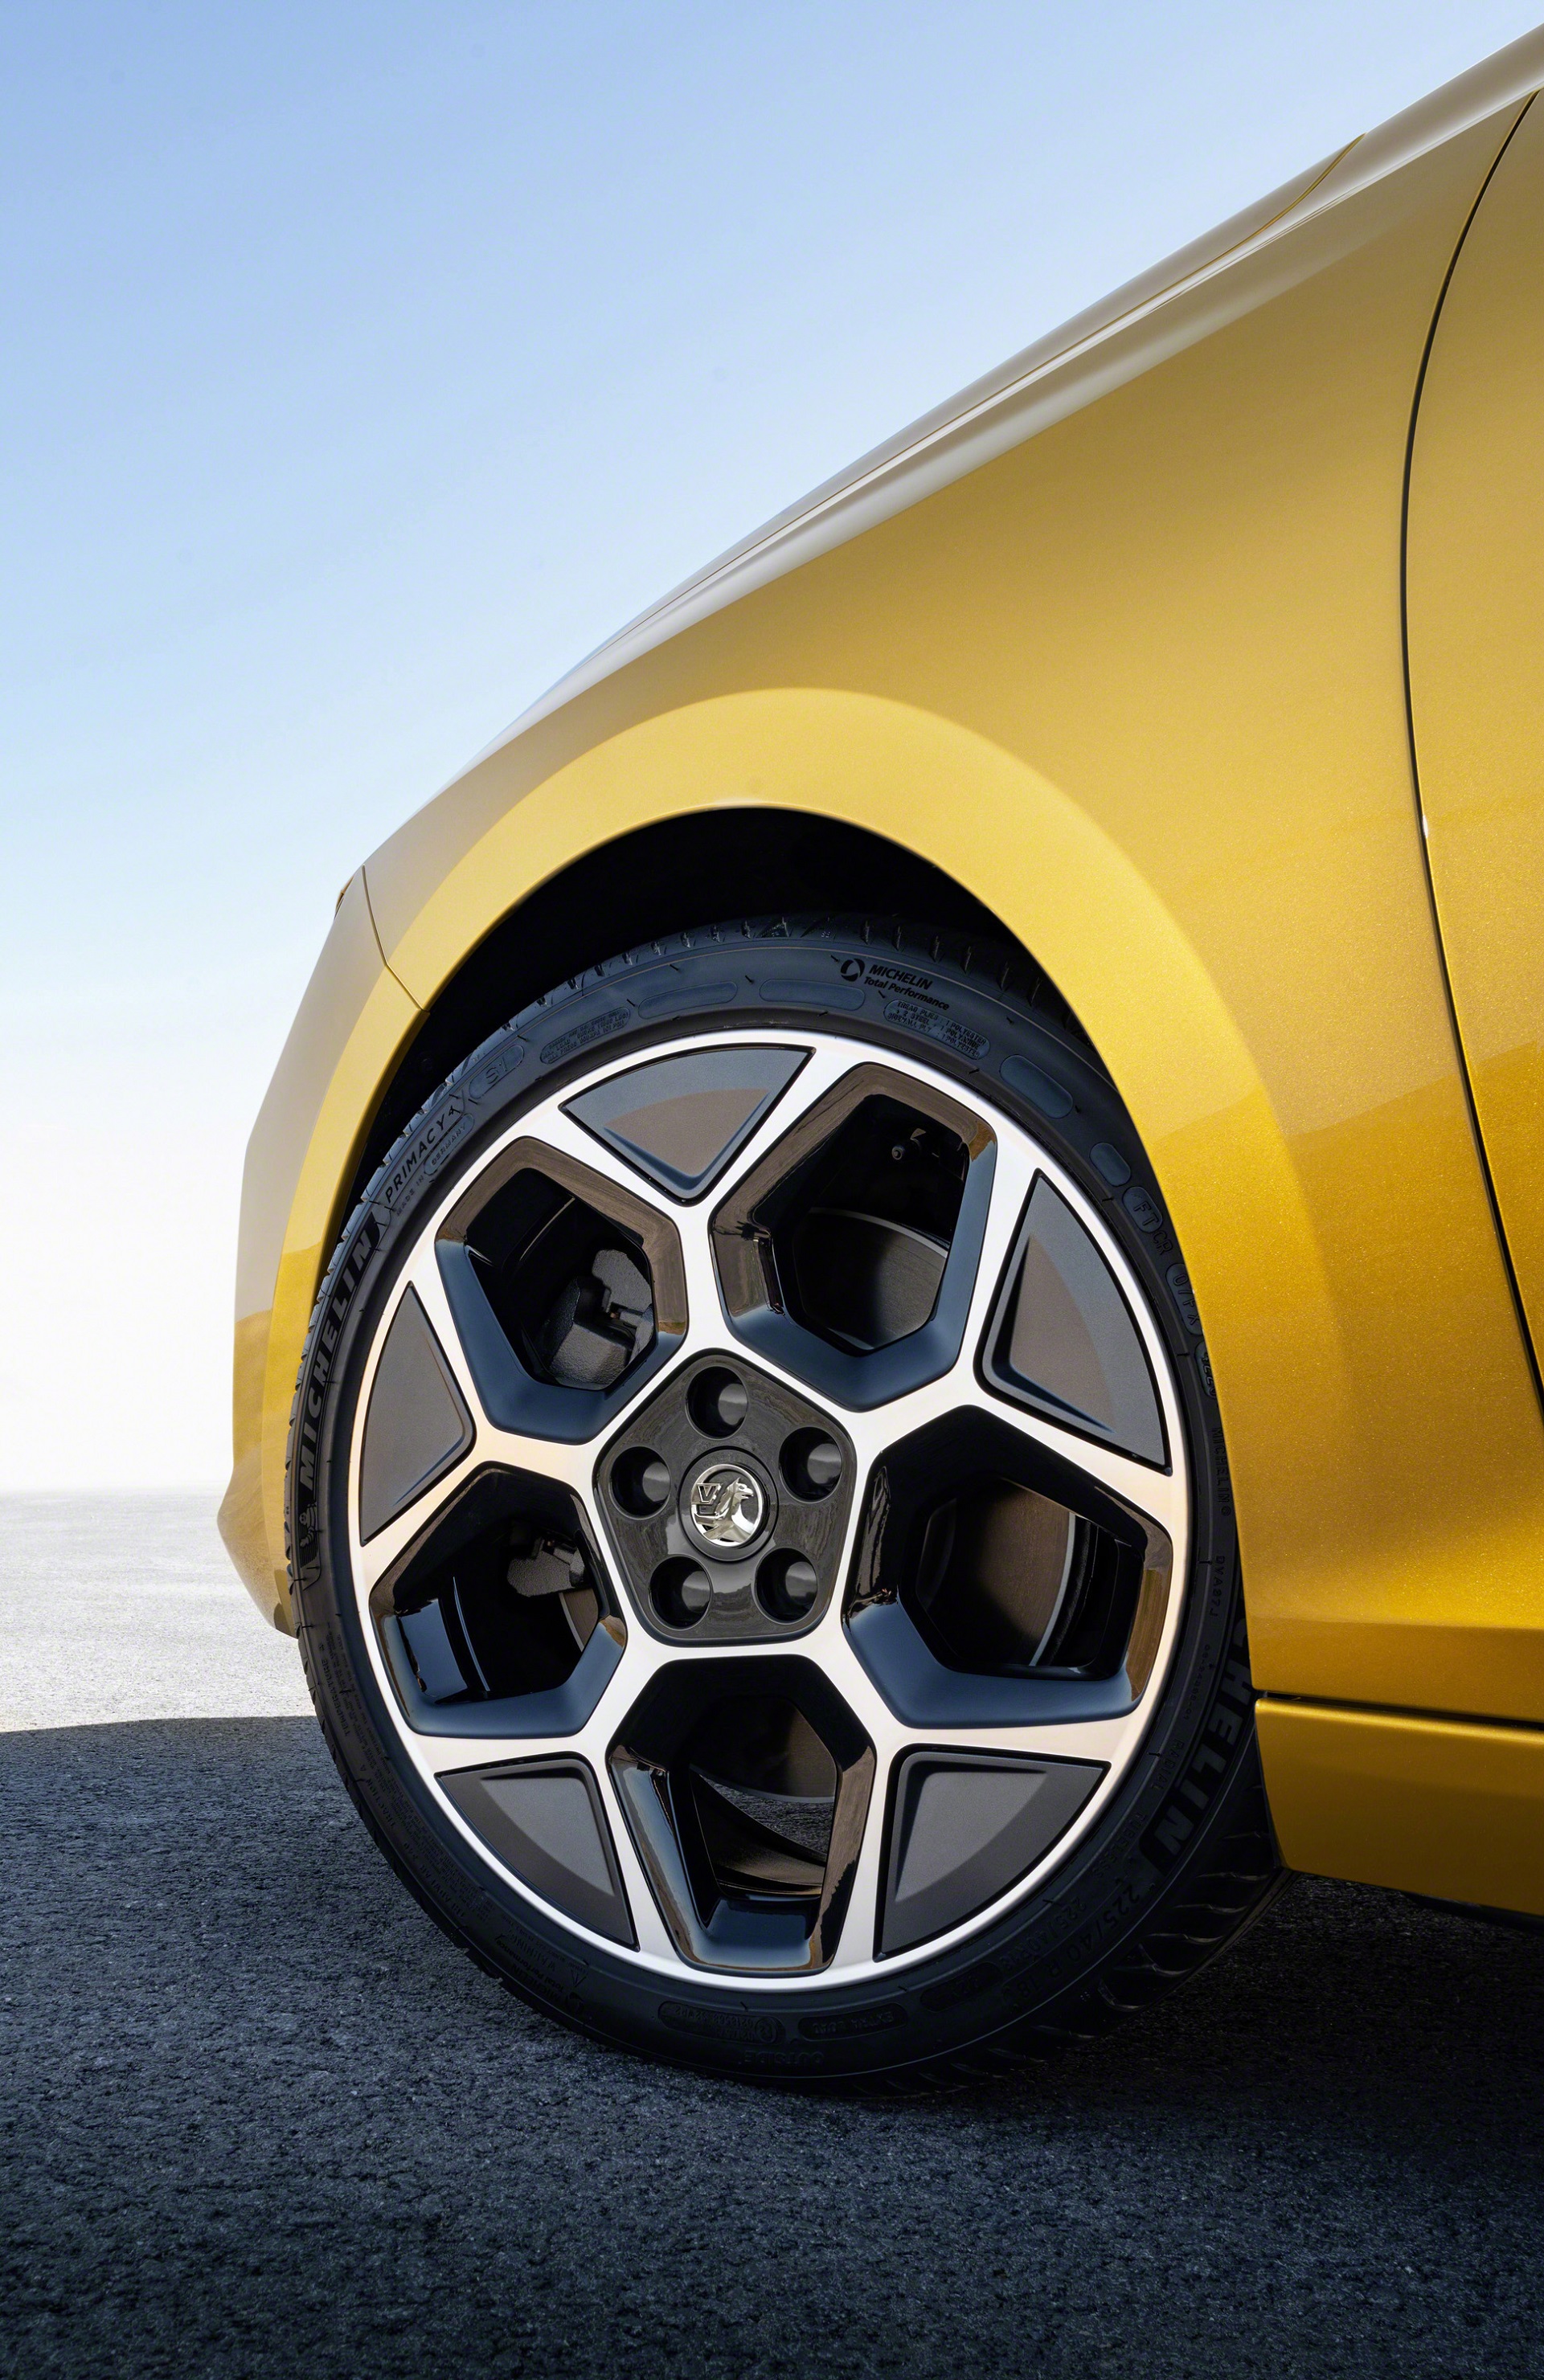 2022 Vauxhall Astra Wheel Wallpapers #13 of 16